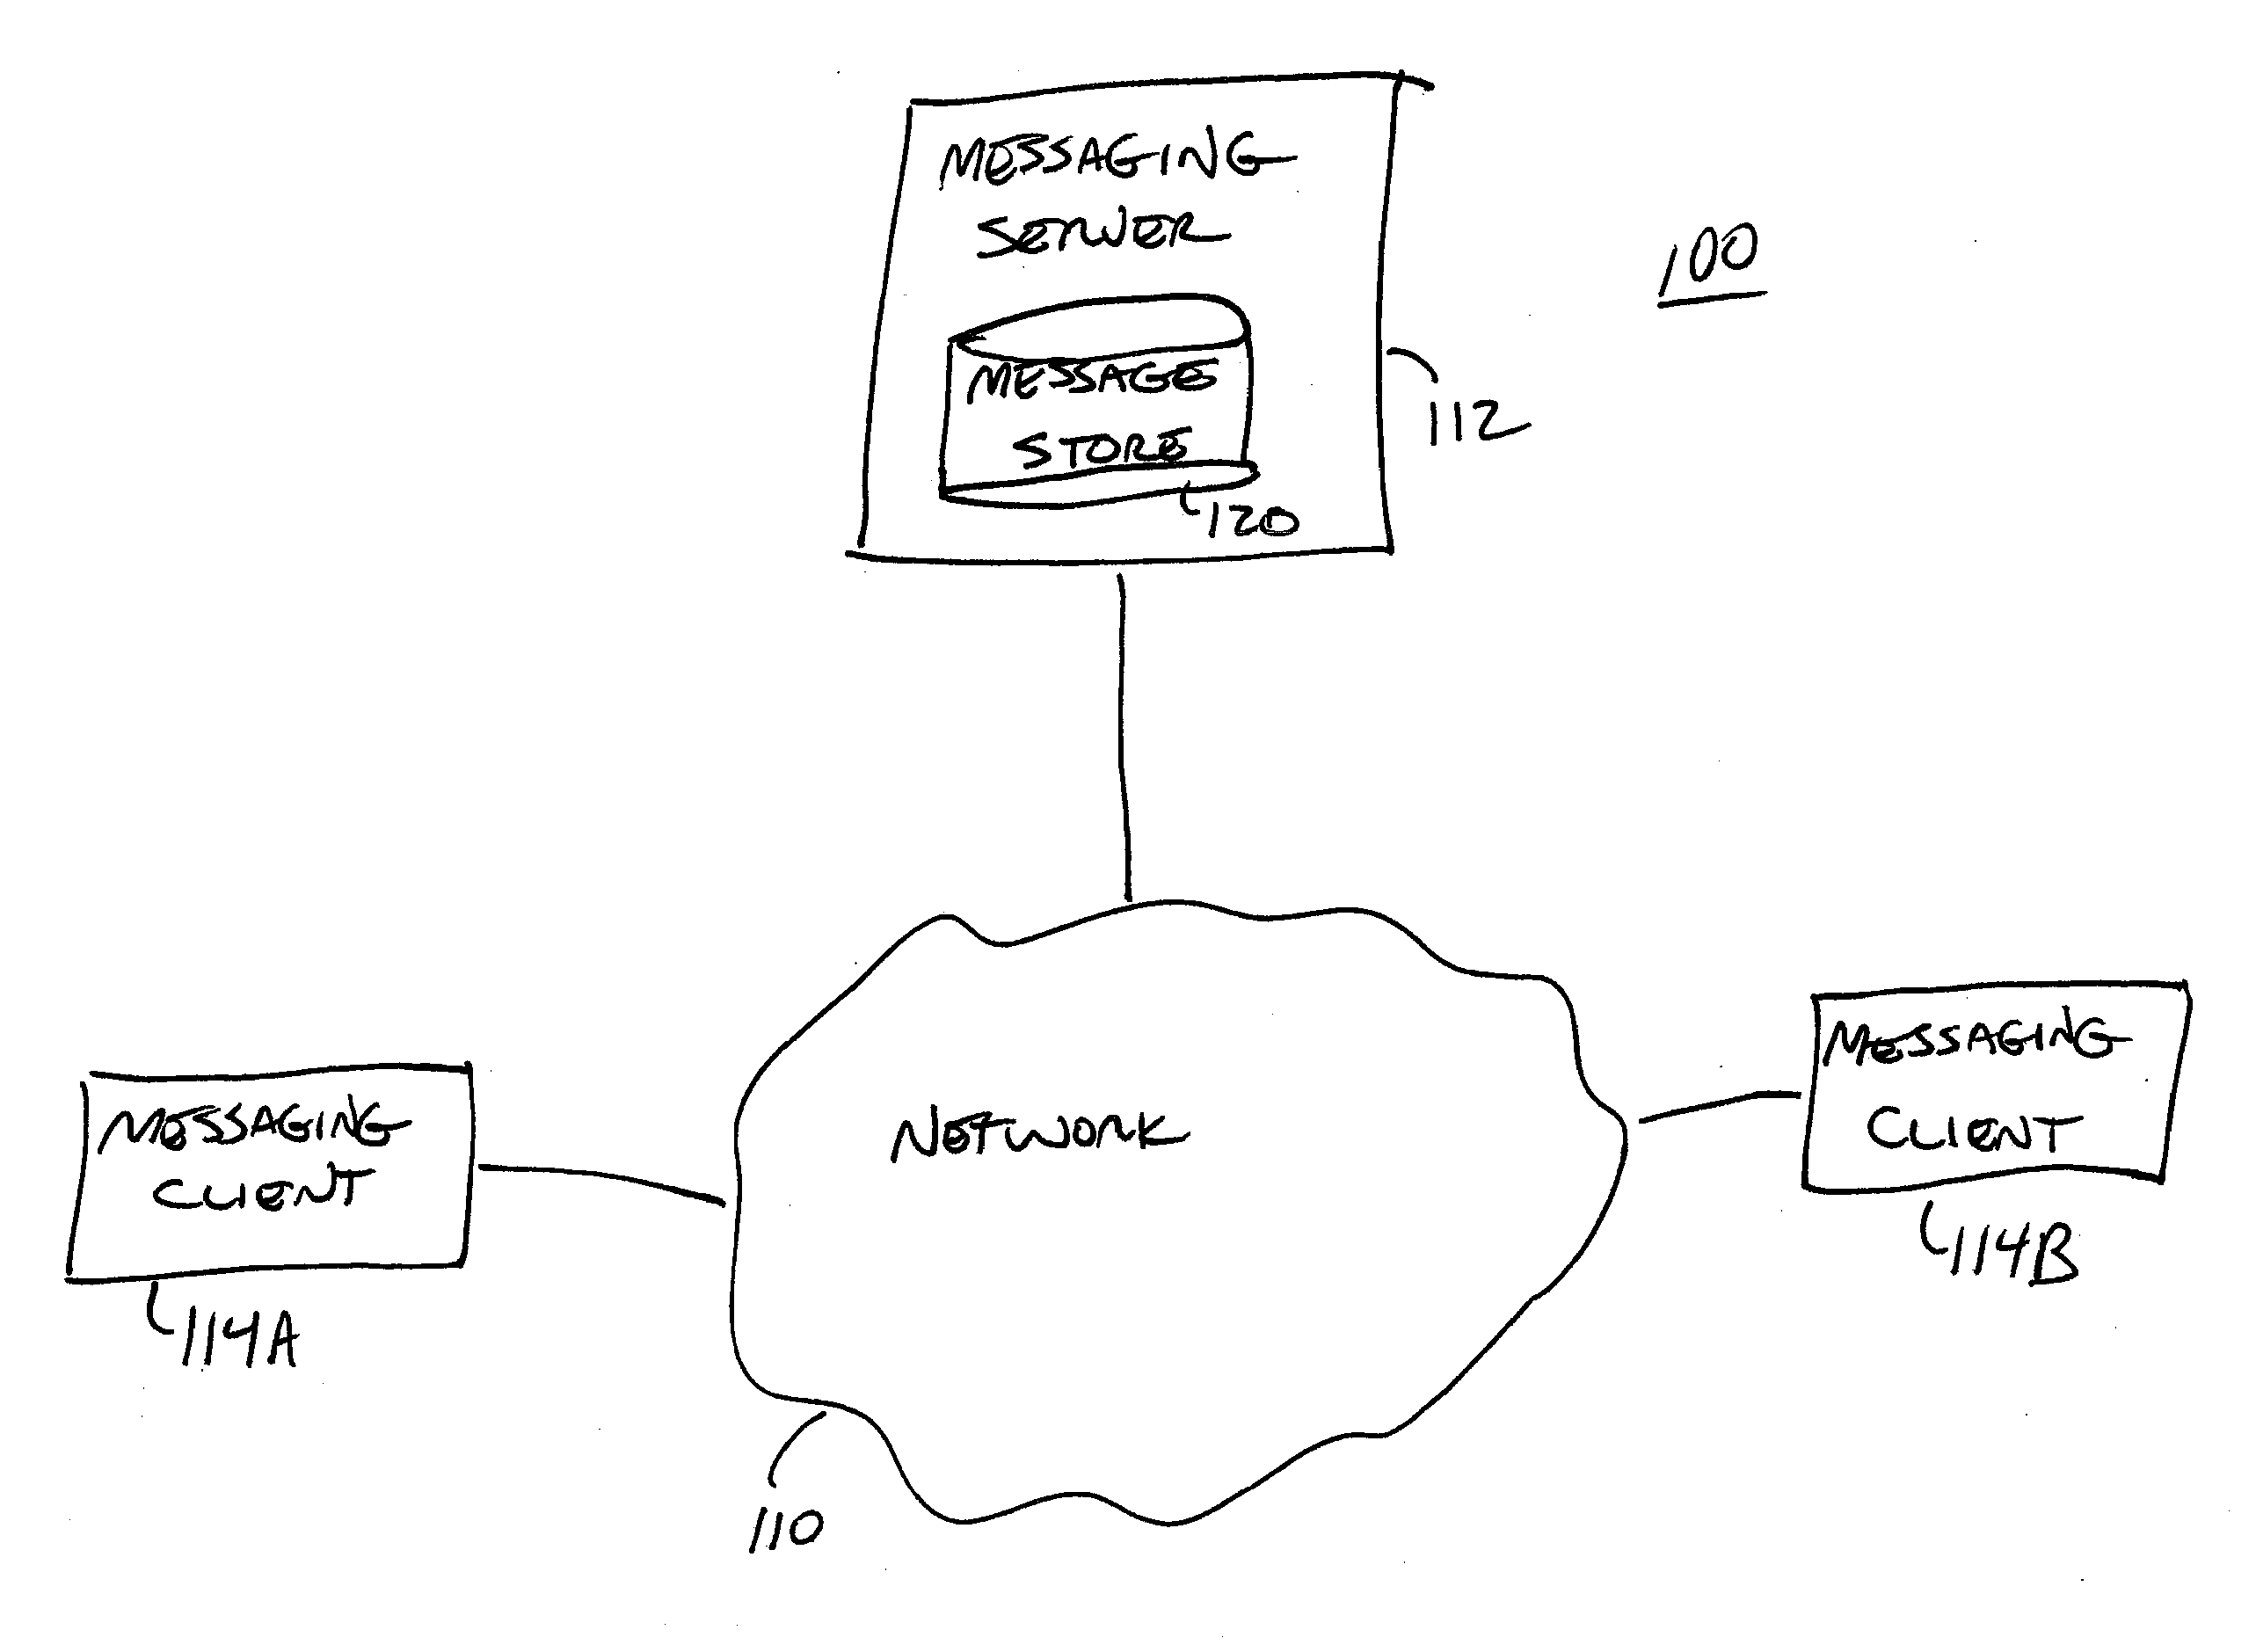 Providing context in an electronic messaging system